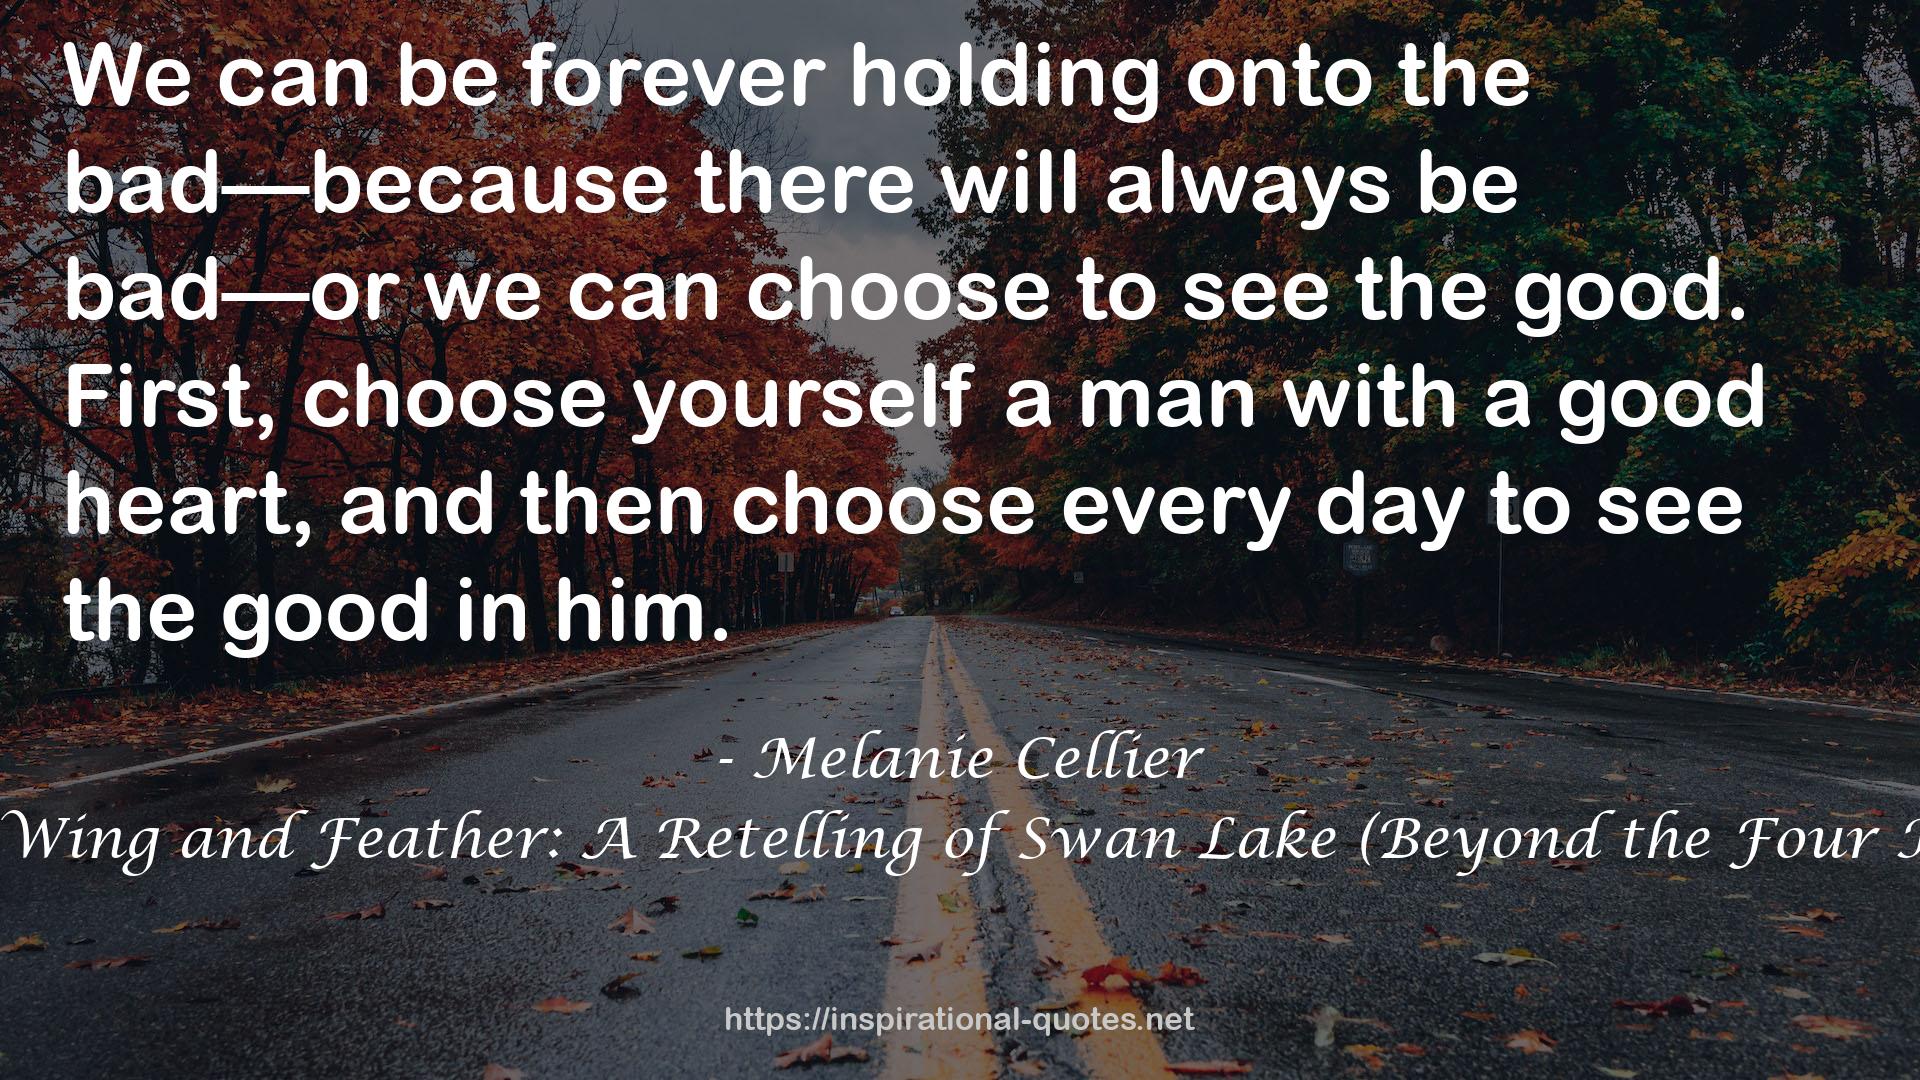 A Captive of Wing and Feather: A Retelling of Swan Lake (Beyond the Four Kingdoms, #5) QUOTES